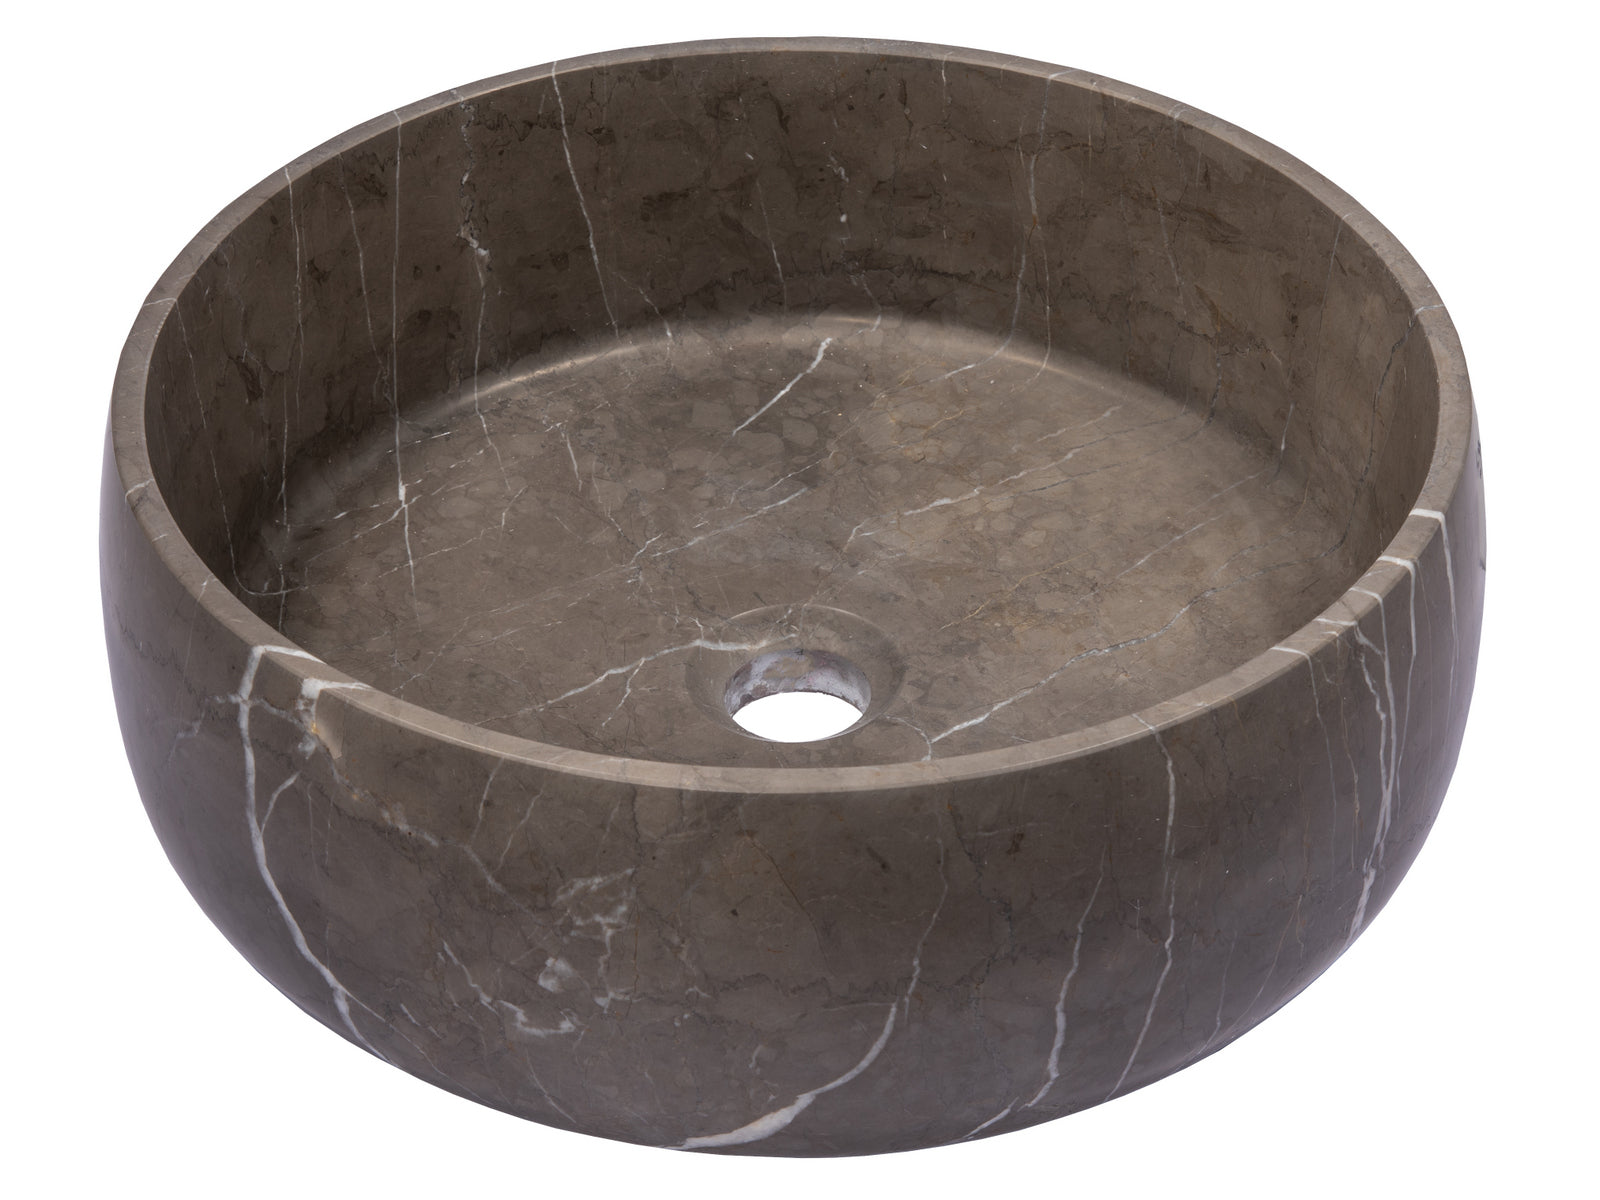 Rounded Vessel Sink in Pietra Grey Marble